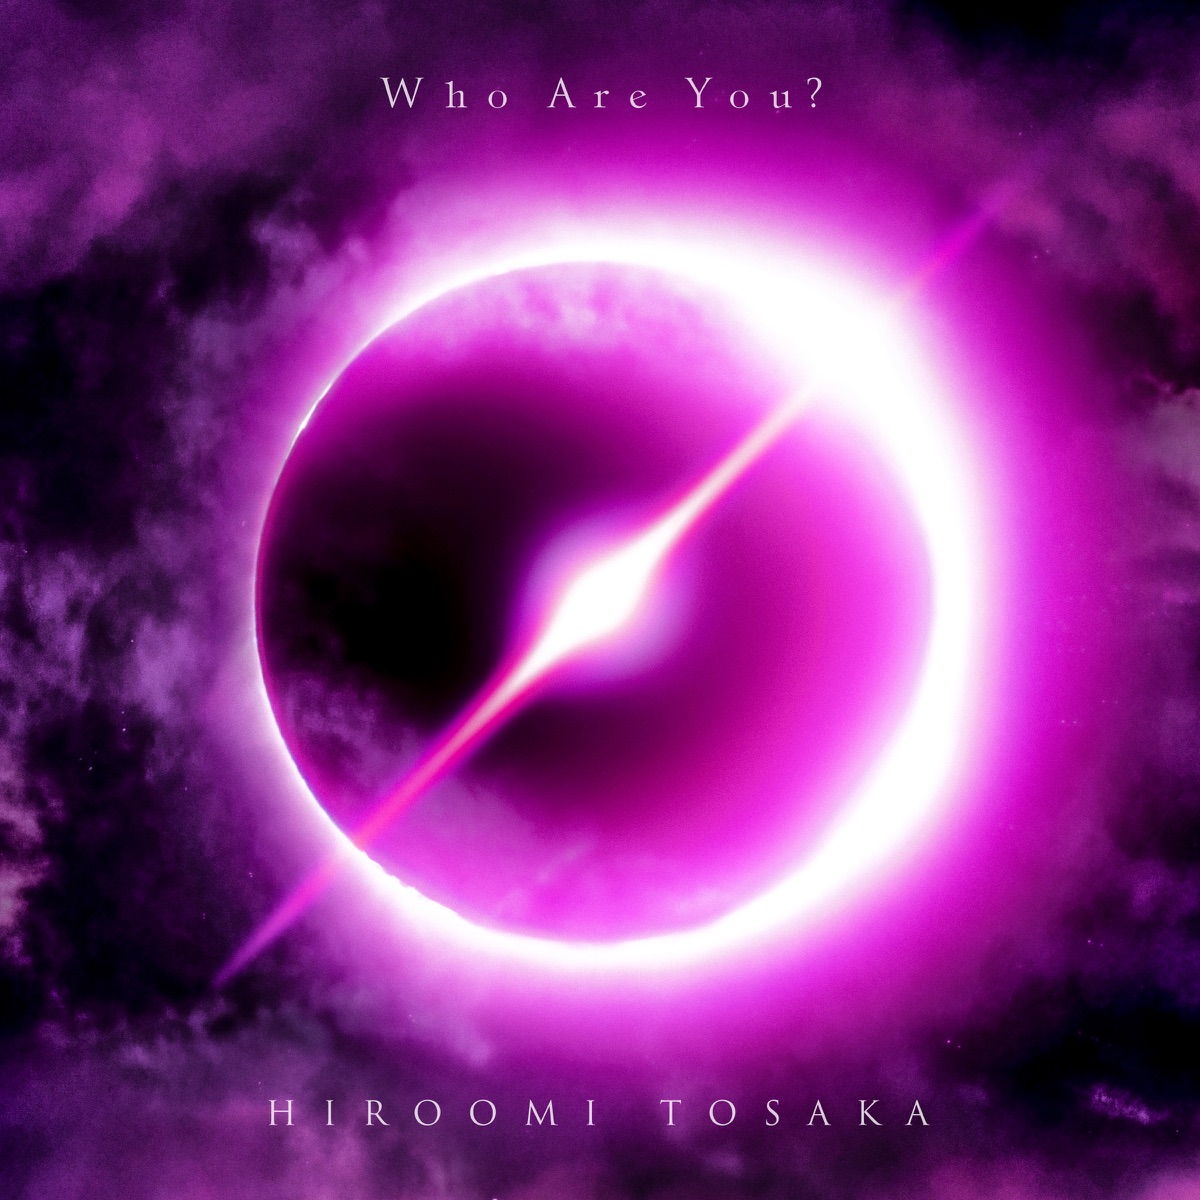 『HIROOMI TOSAKA - Nobody Knows』収録の『Who Are You?』ジャケット